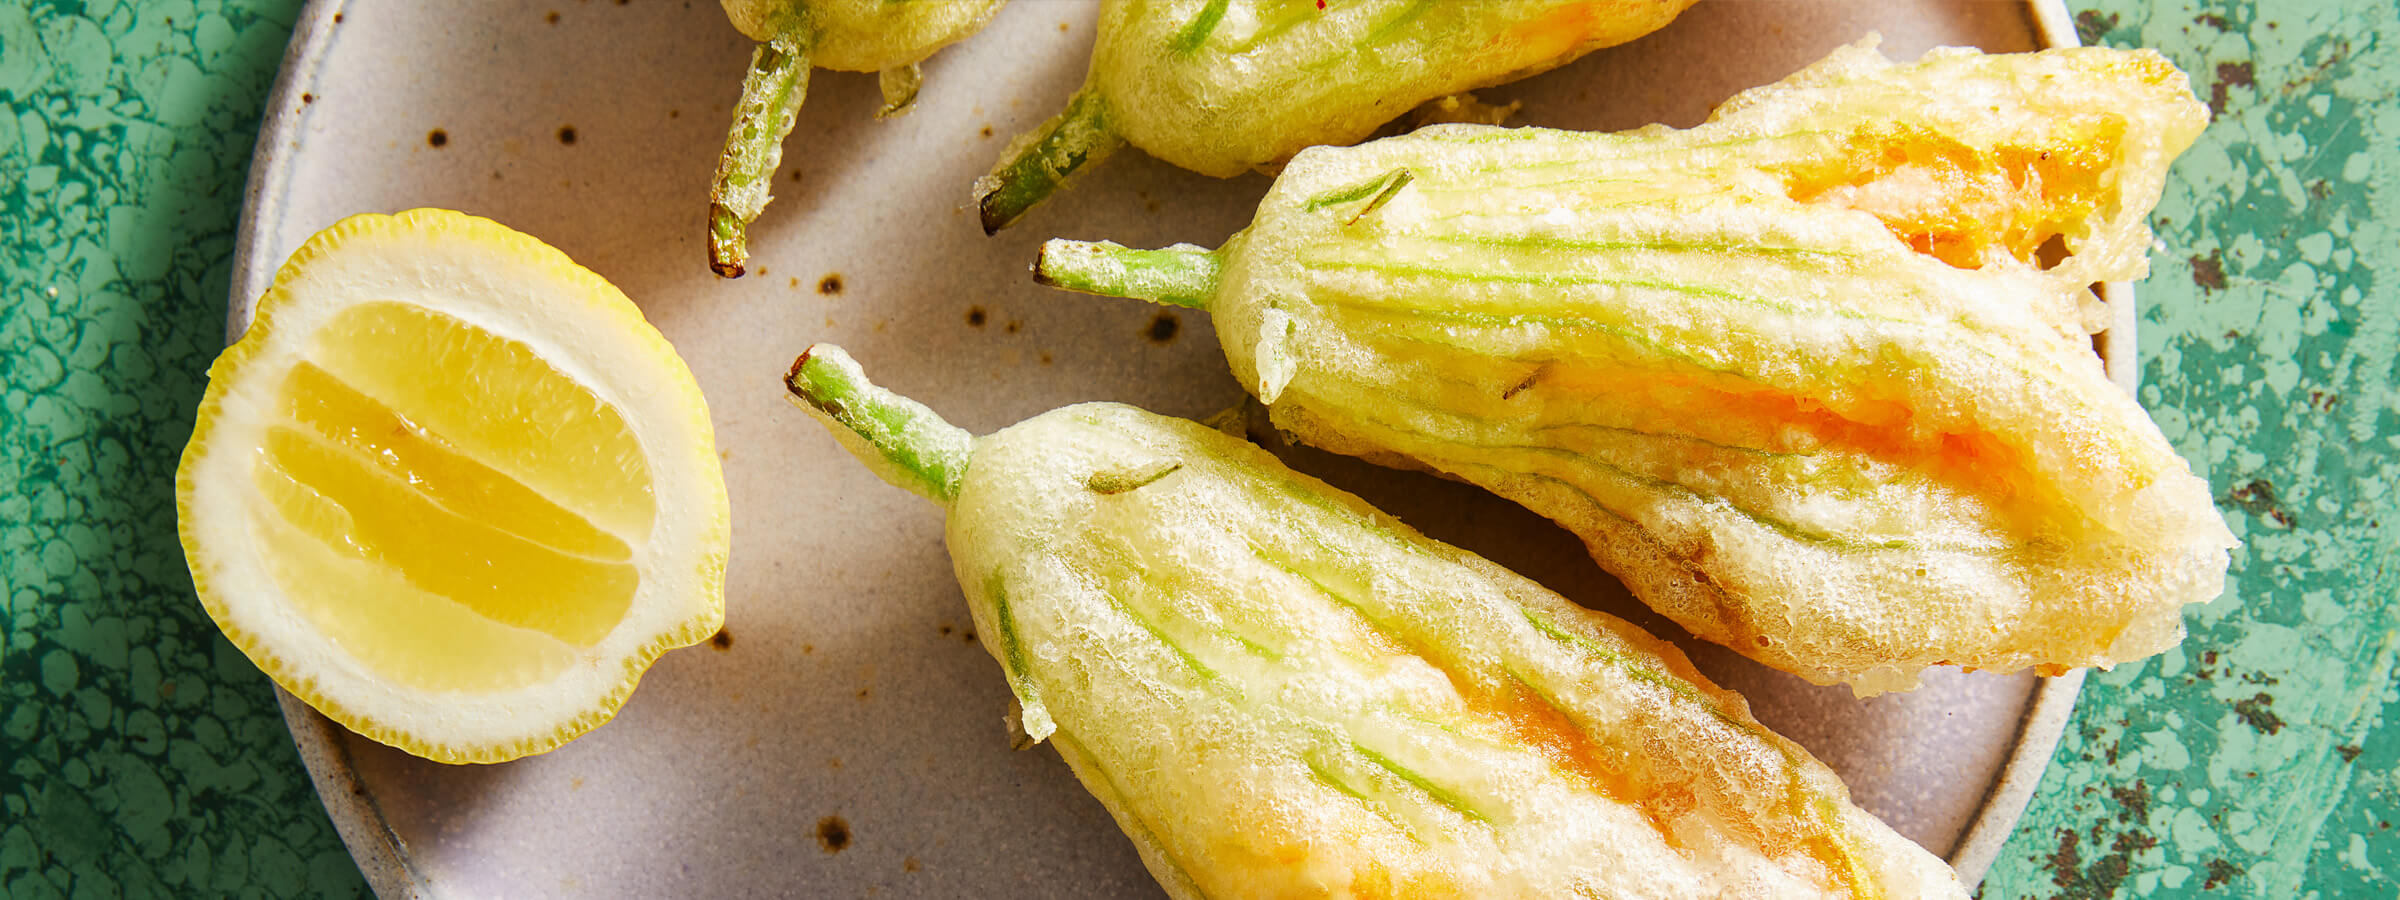 Squash Blossoms from Chef Willits at Abernethys - desktop version